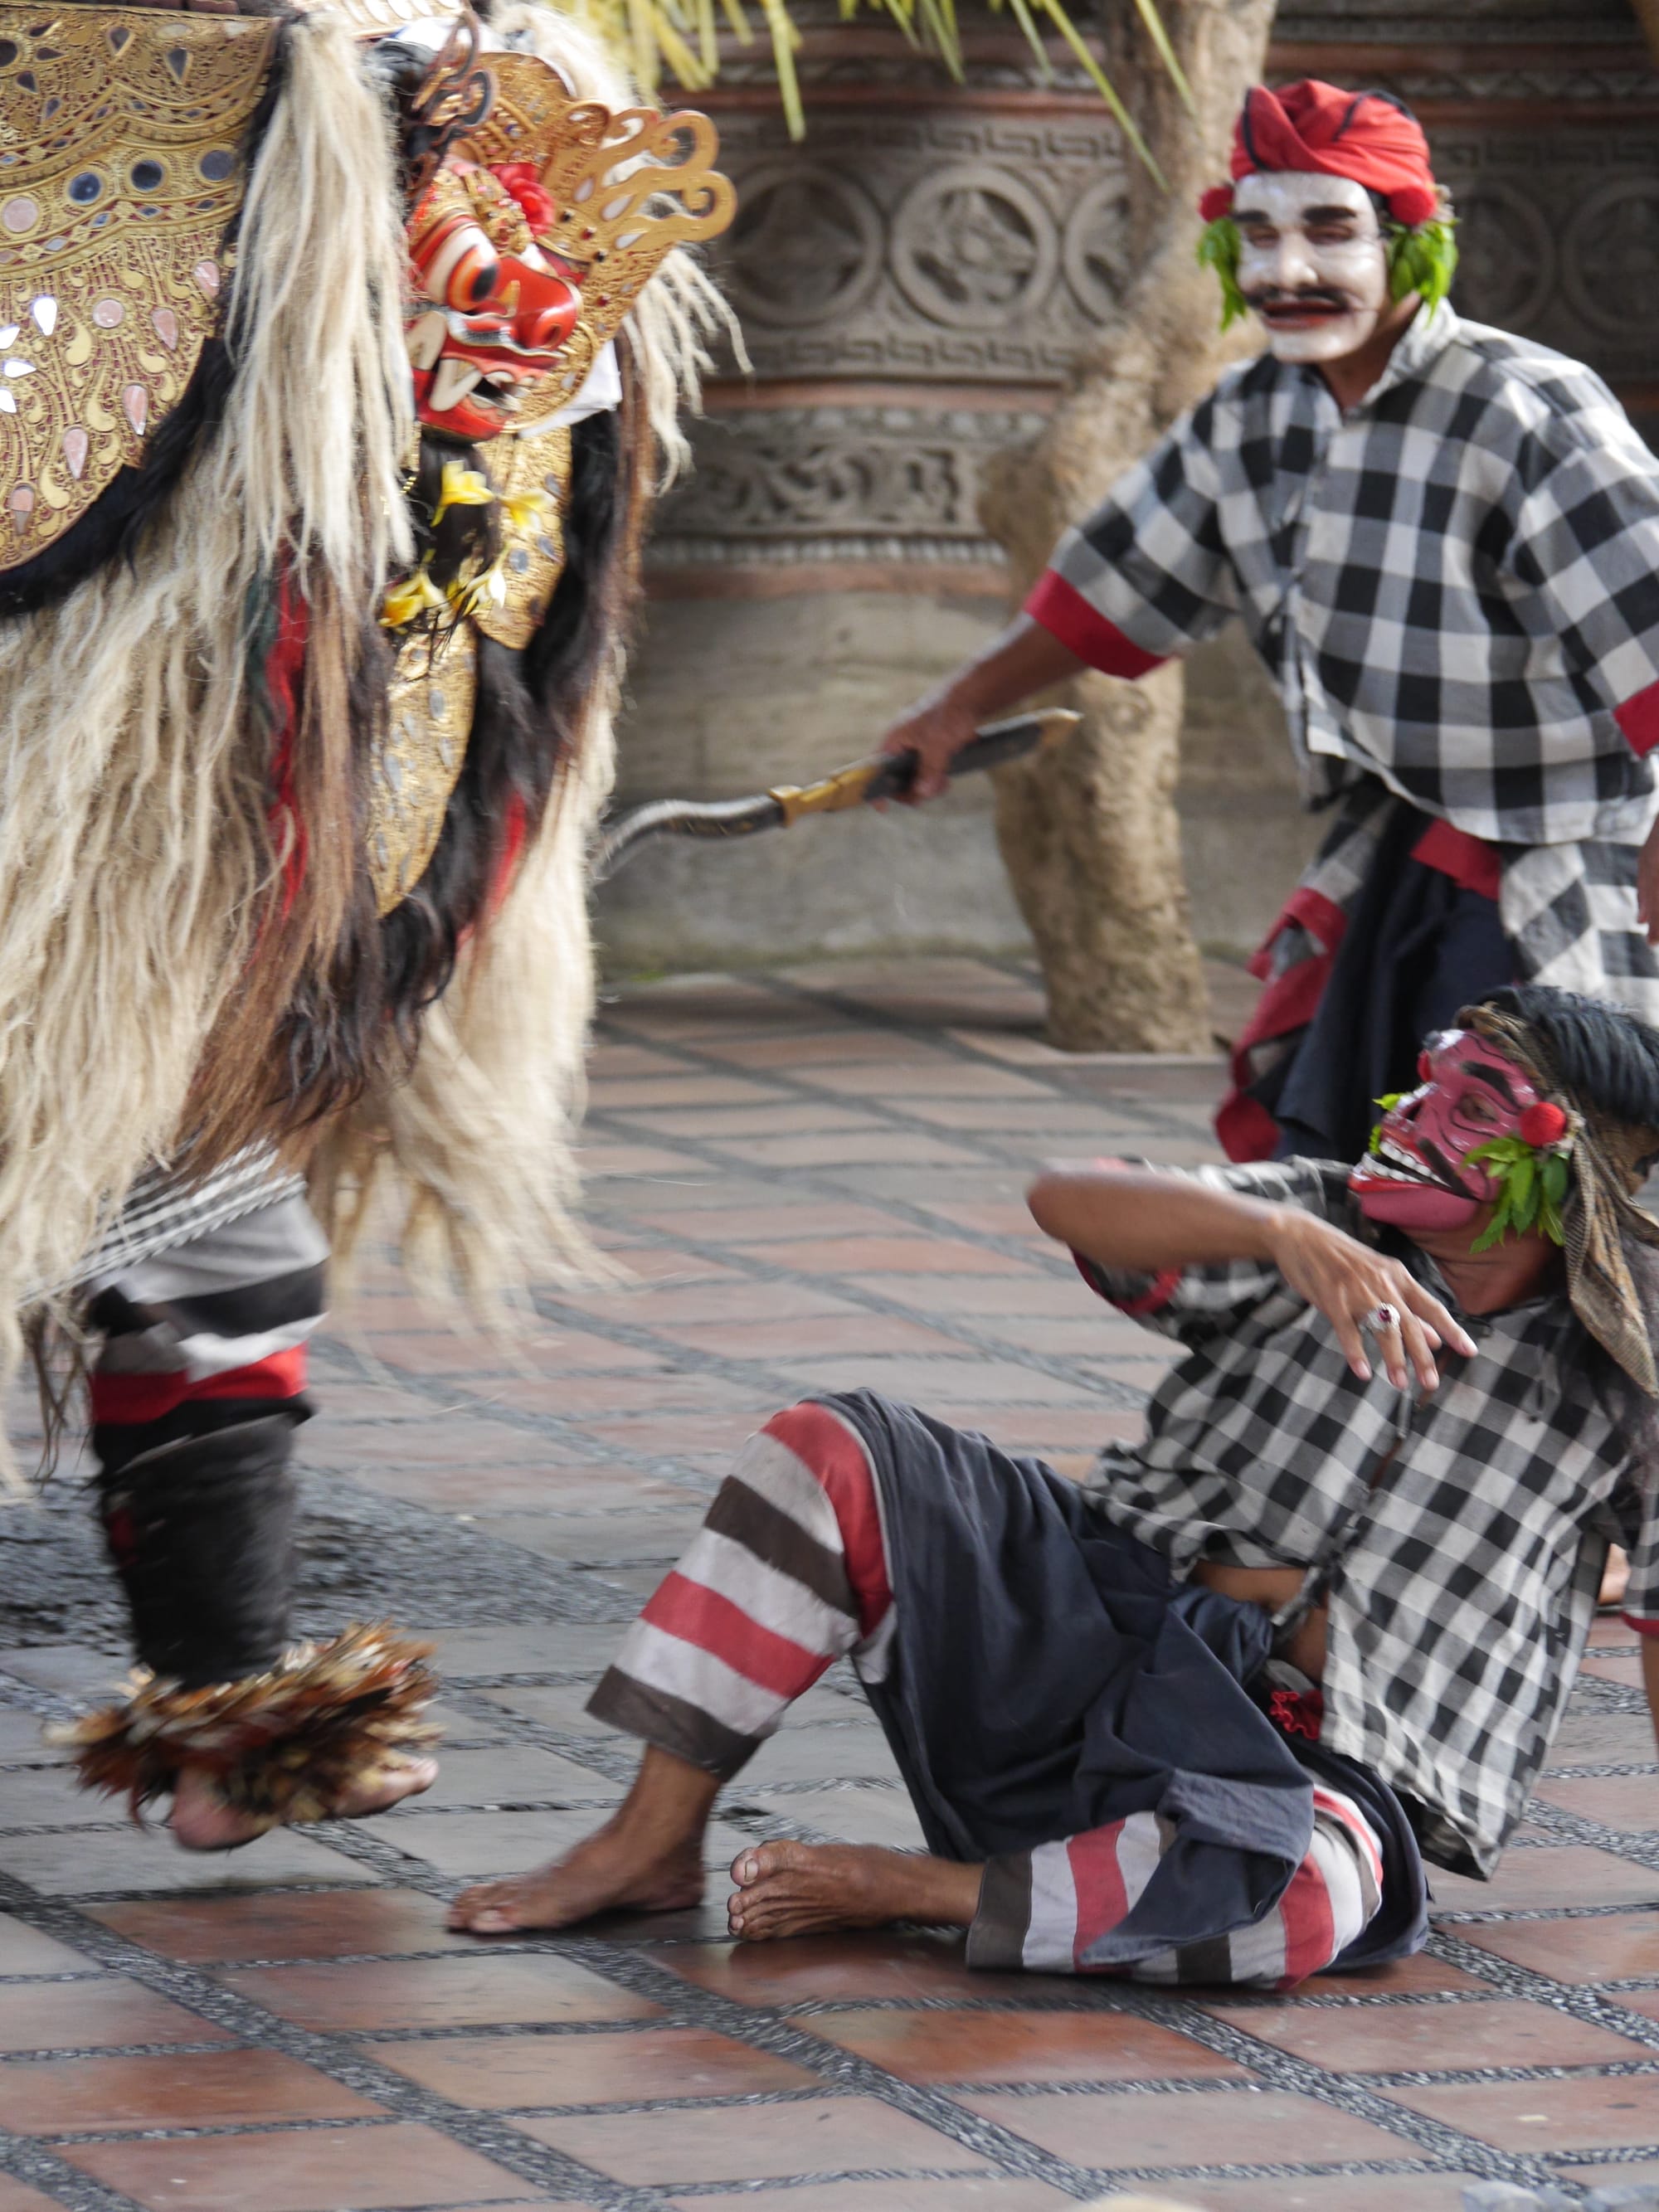 Photo by Author — winemaker attacked by a tiger — Sahadewa Barong and Kris Dance, Bali, Indonesia